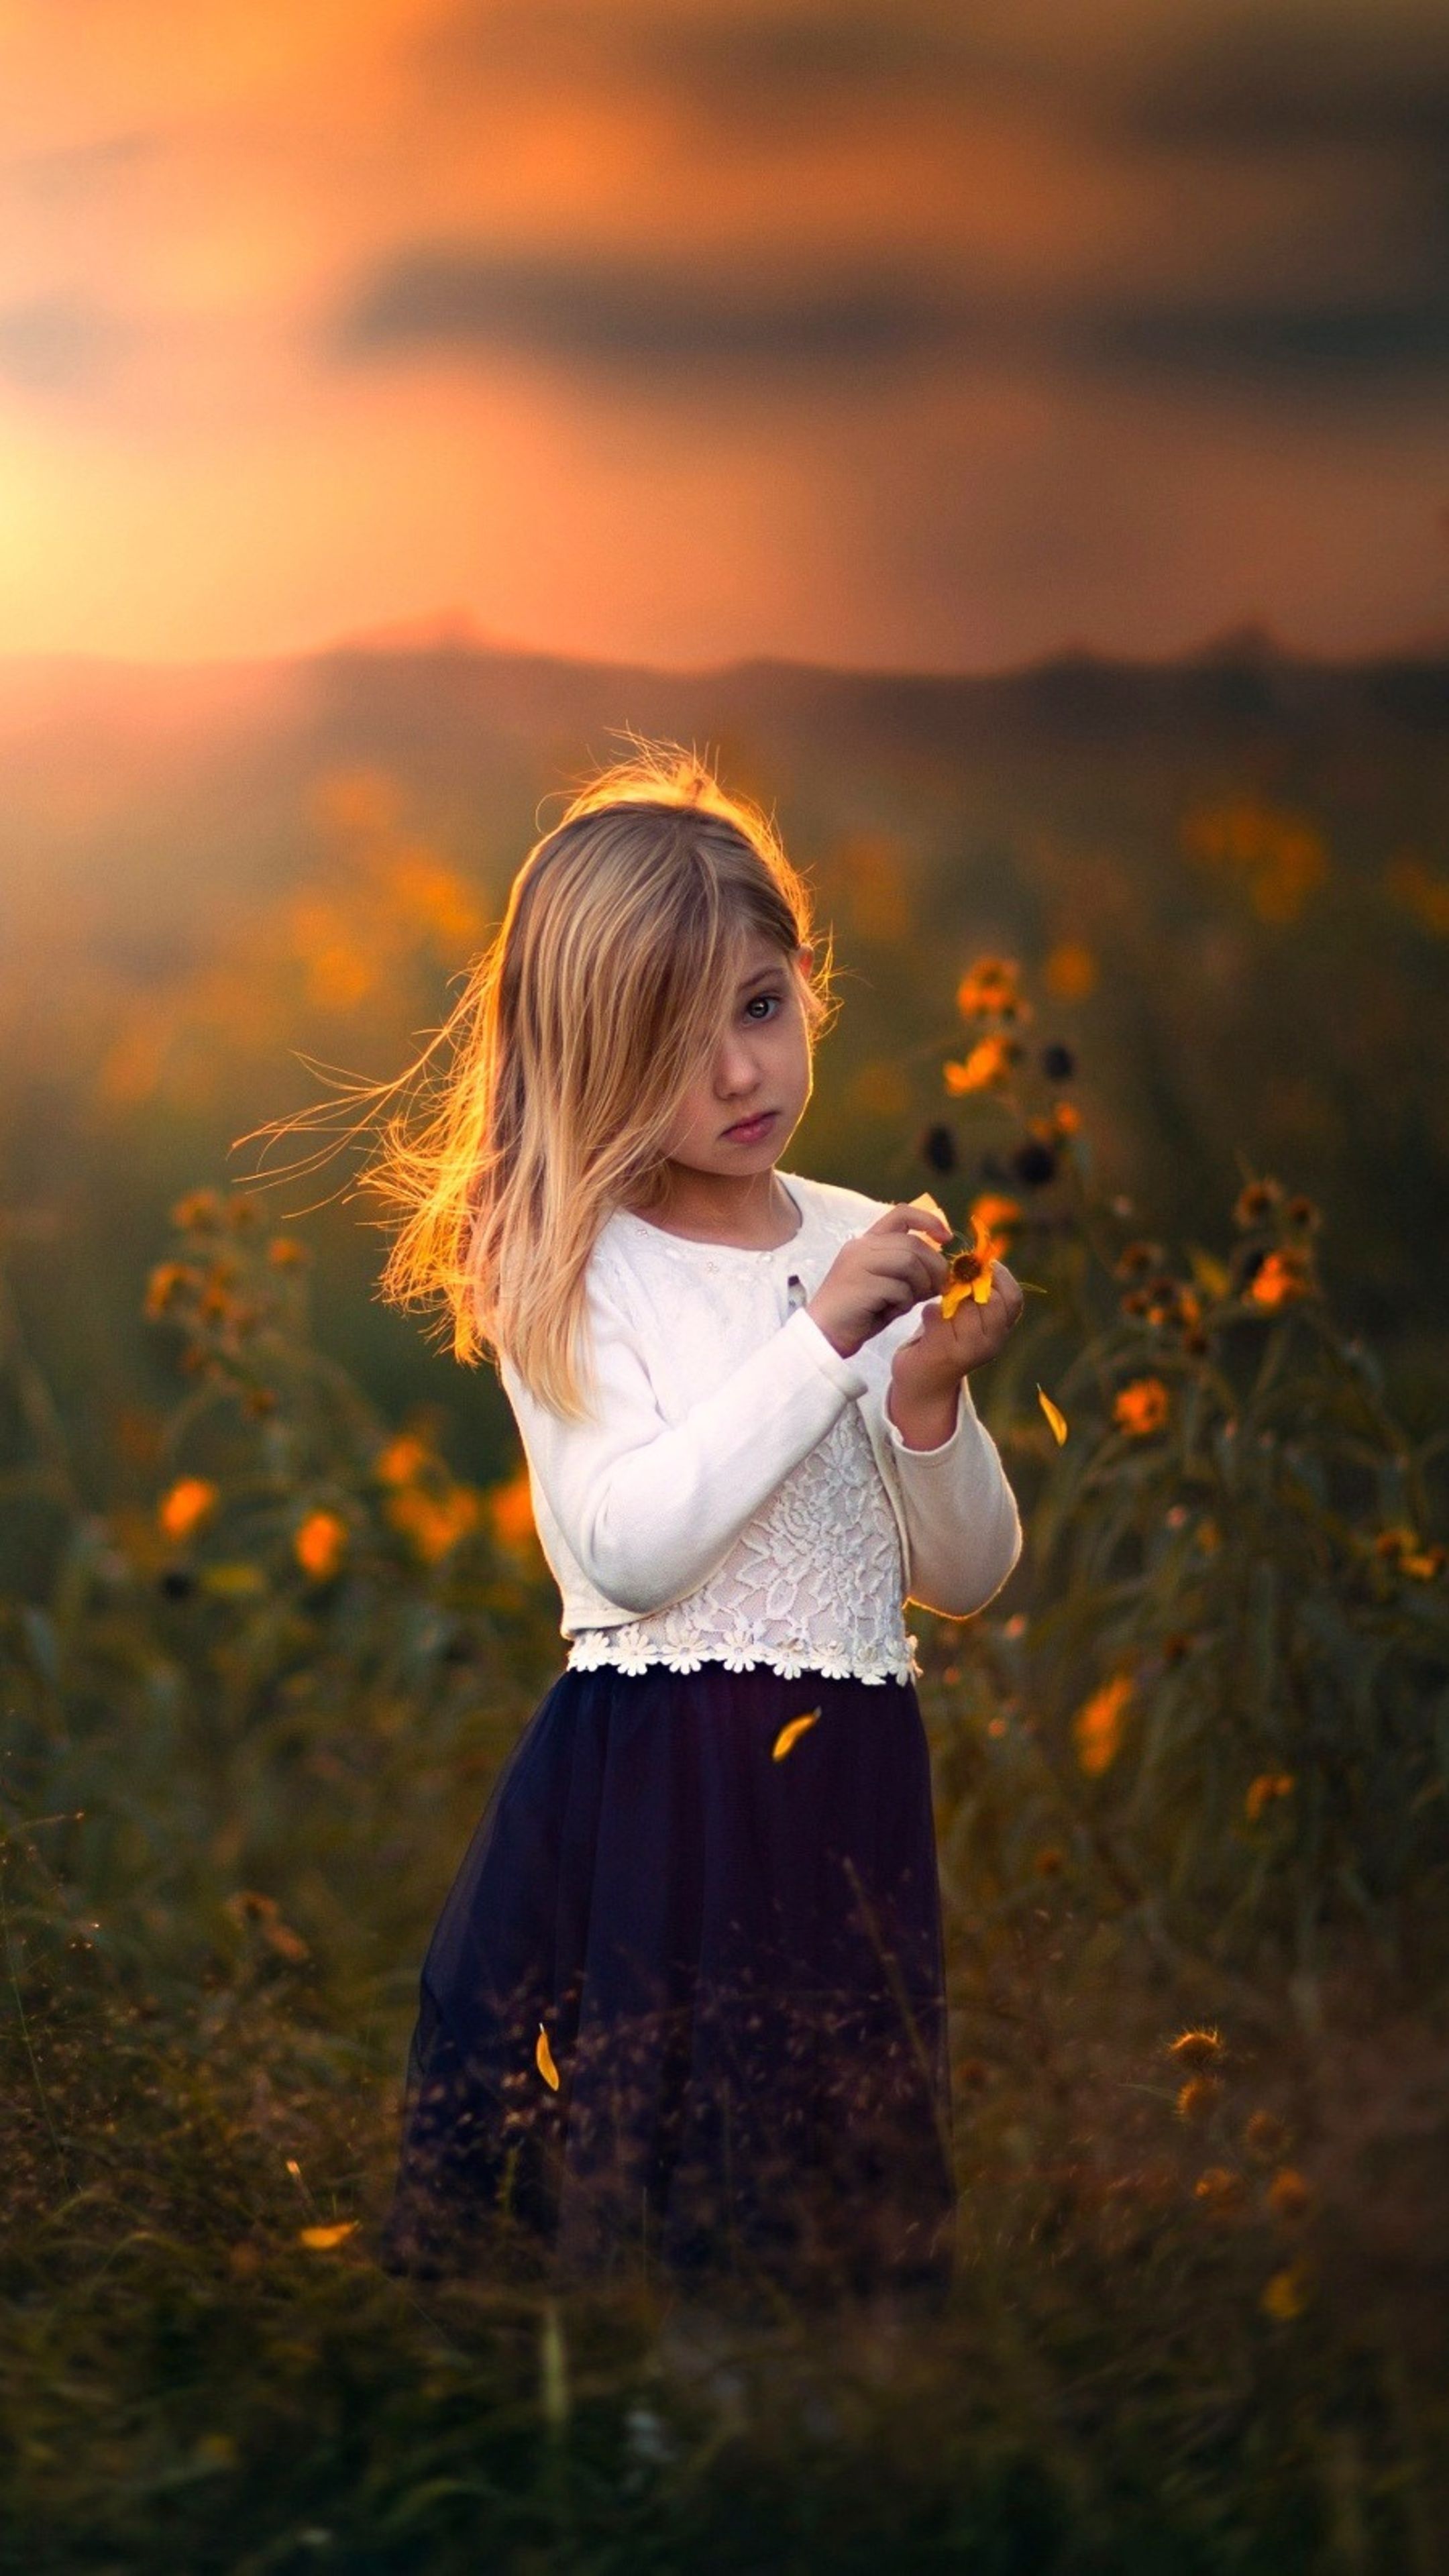 Cute Child Girl With Flowers Outdoors Sony Xperia X, XZ, Z5 Premium HD 4k Wallpaper, Image, Background, Photo and Picture